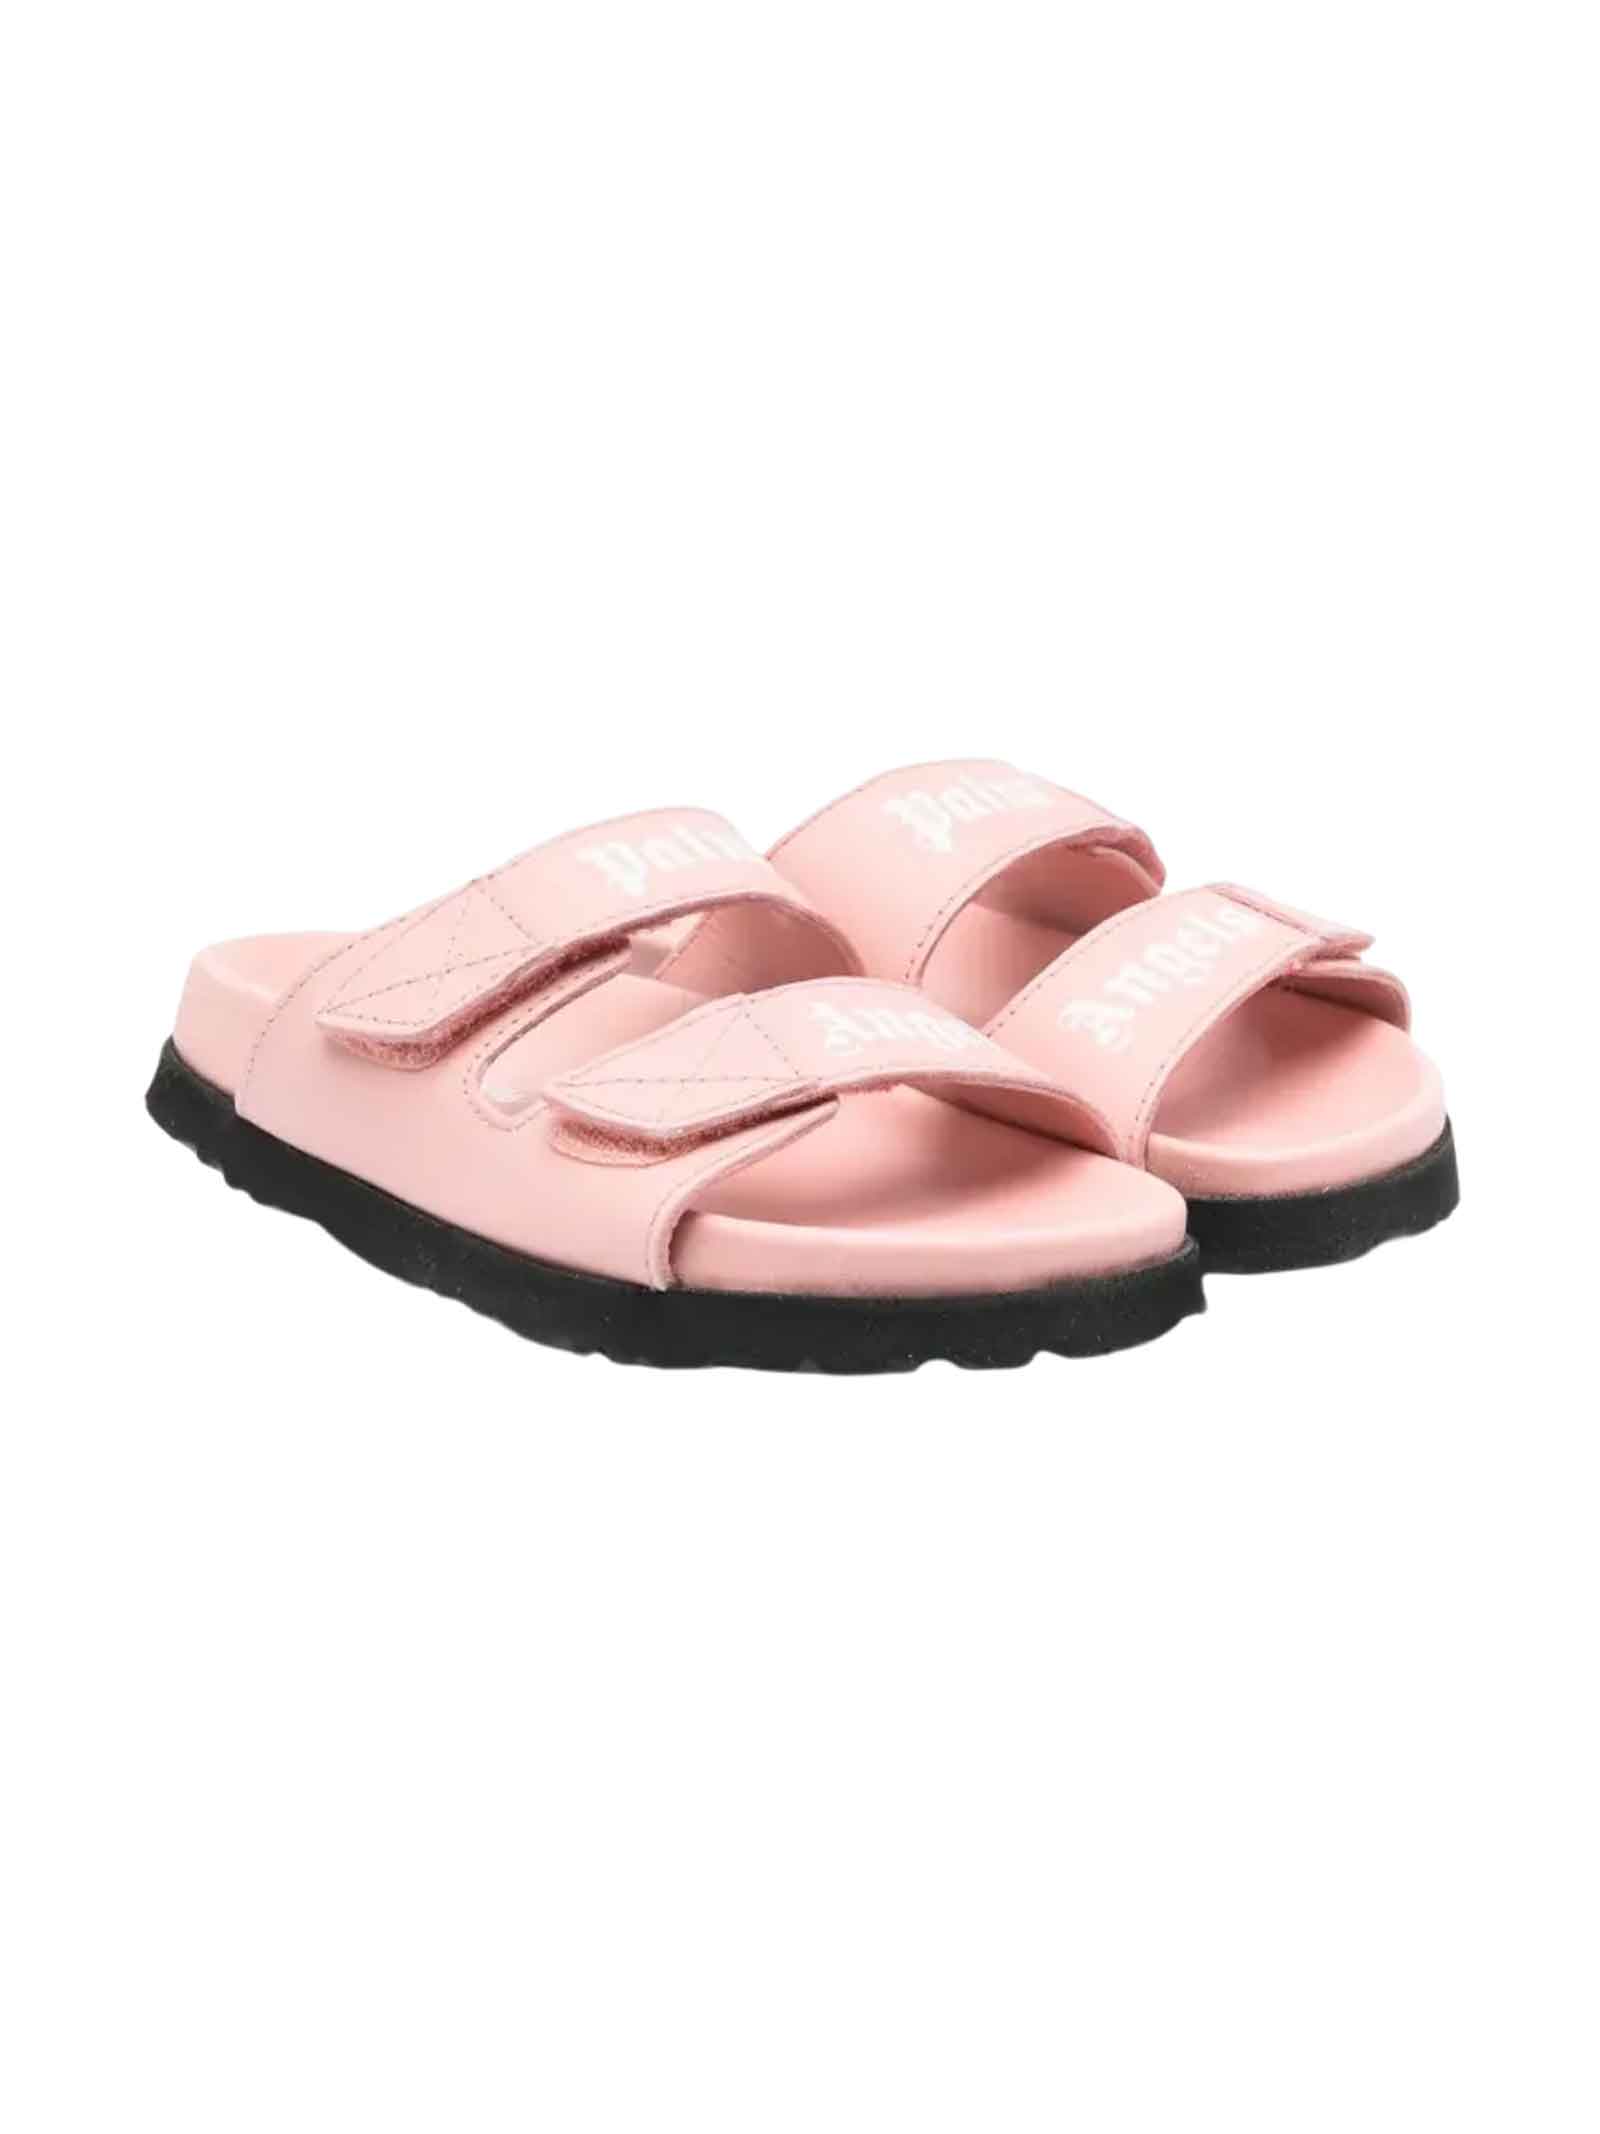 PALM ANGELS PINK SANDALS GIRL